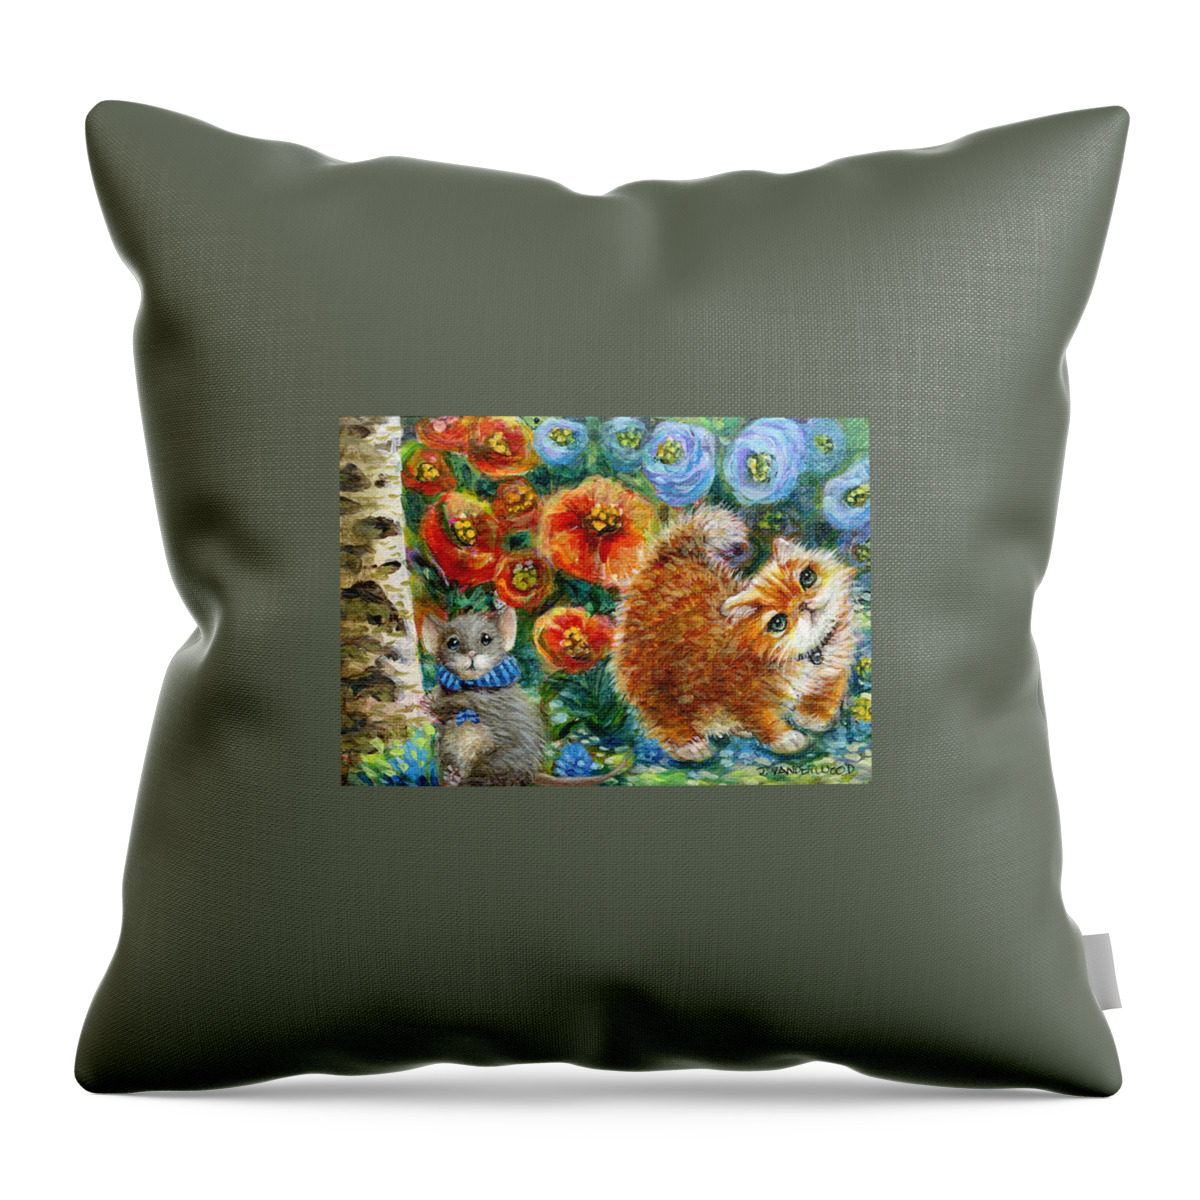 Cat Throw Pillow featuring the painting Best Friends by Jacquelin L Vanderwood Westerman